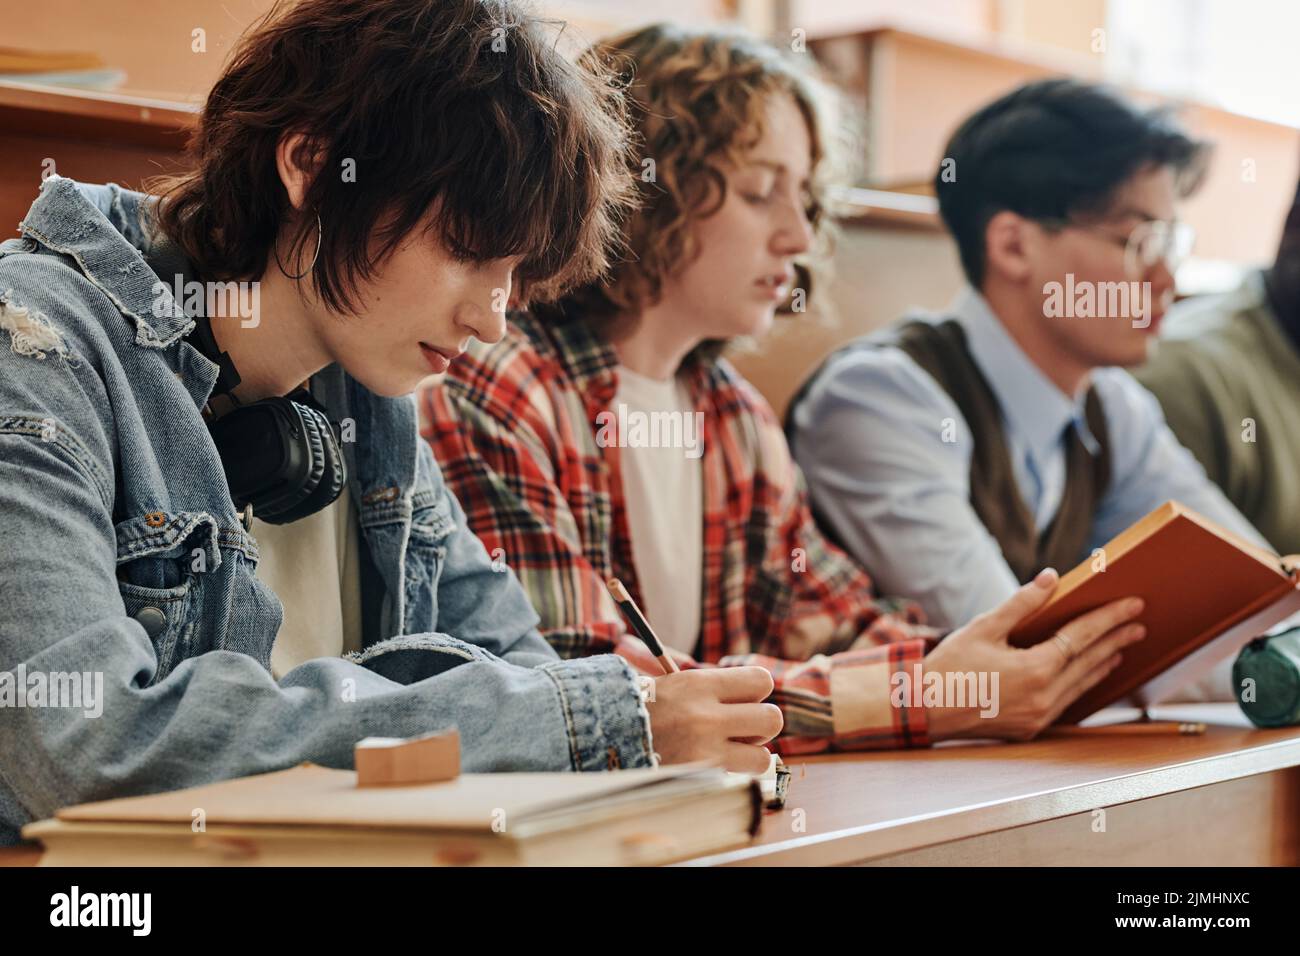 Row of several intercultural teenagers in casualwear making notes and reading book while sitting by desk in lecture hall Stock Photo